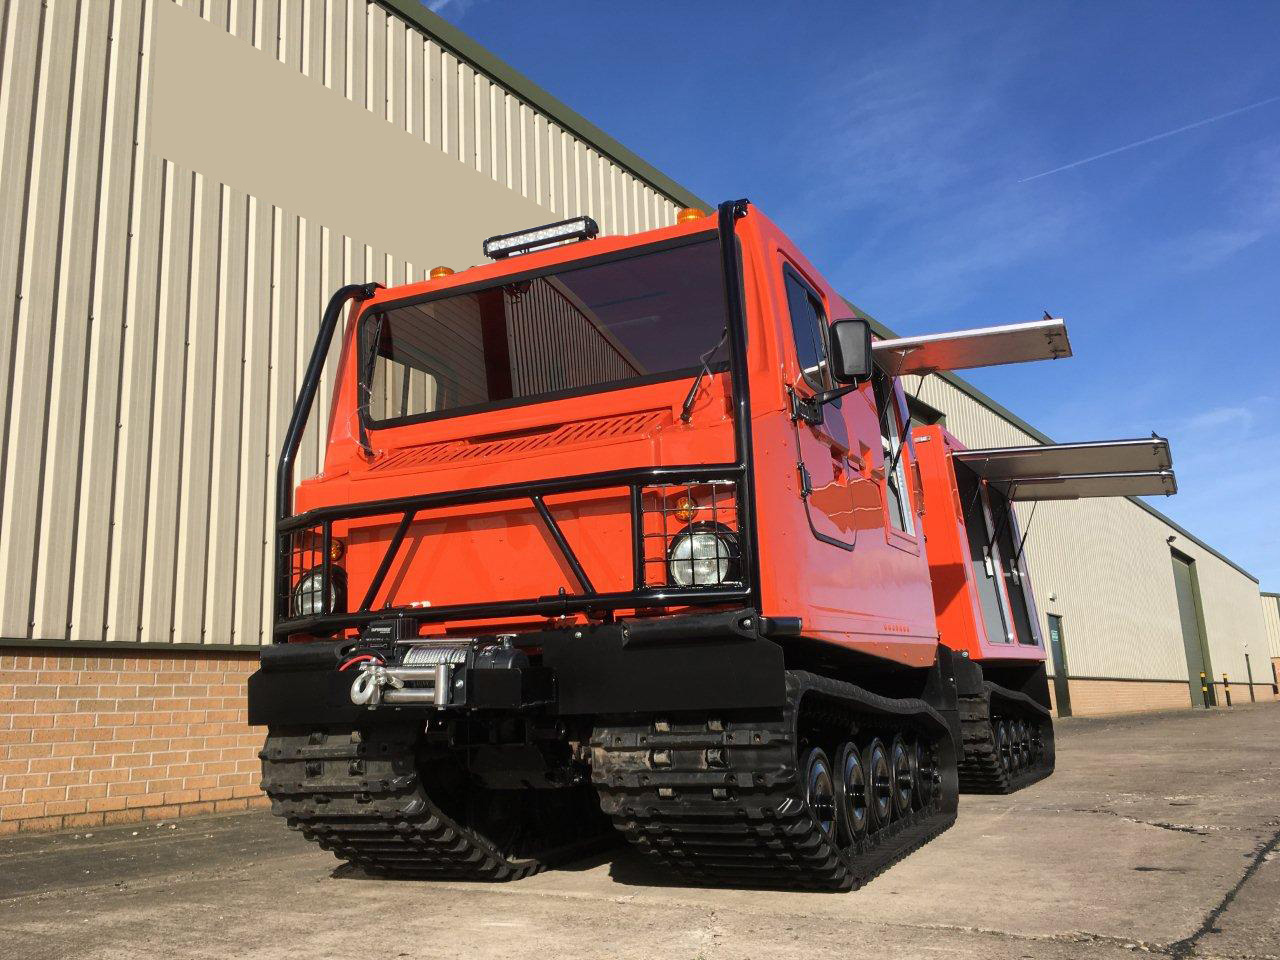 military vehicles for sale - <a href='/index.php/manufacturer/hagglunds/50253-hagglund-bv206-multi-purpose-vehicle' title='Read more...' class='joodb_titletink'>Hagglund BV206 Multi-Purpose Vehicle</a>